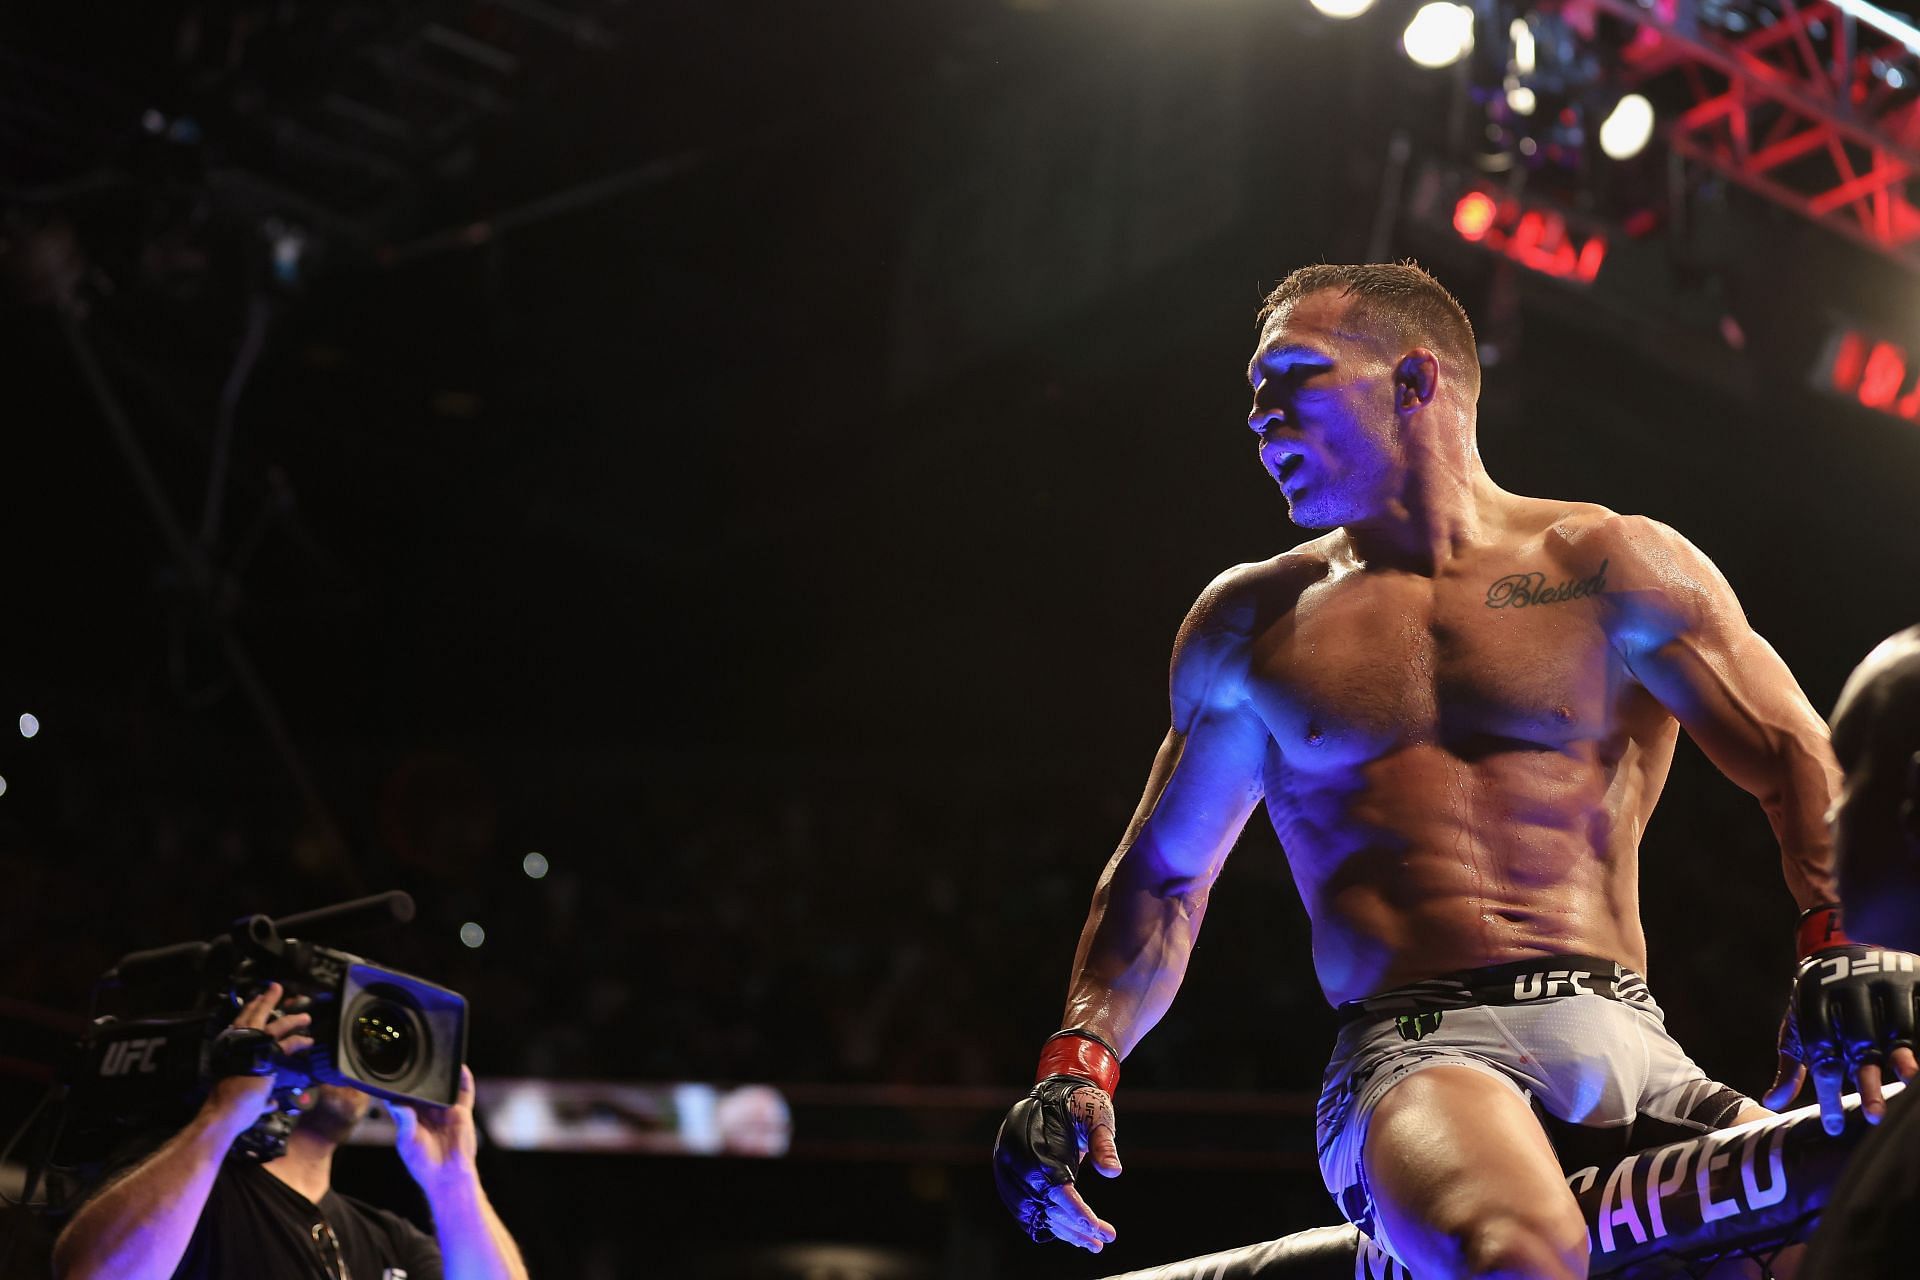 Michael Chandler burst onto the scene and instantly became a superstar